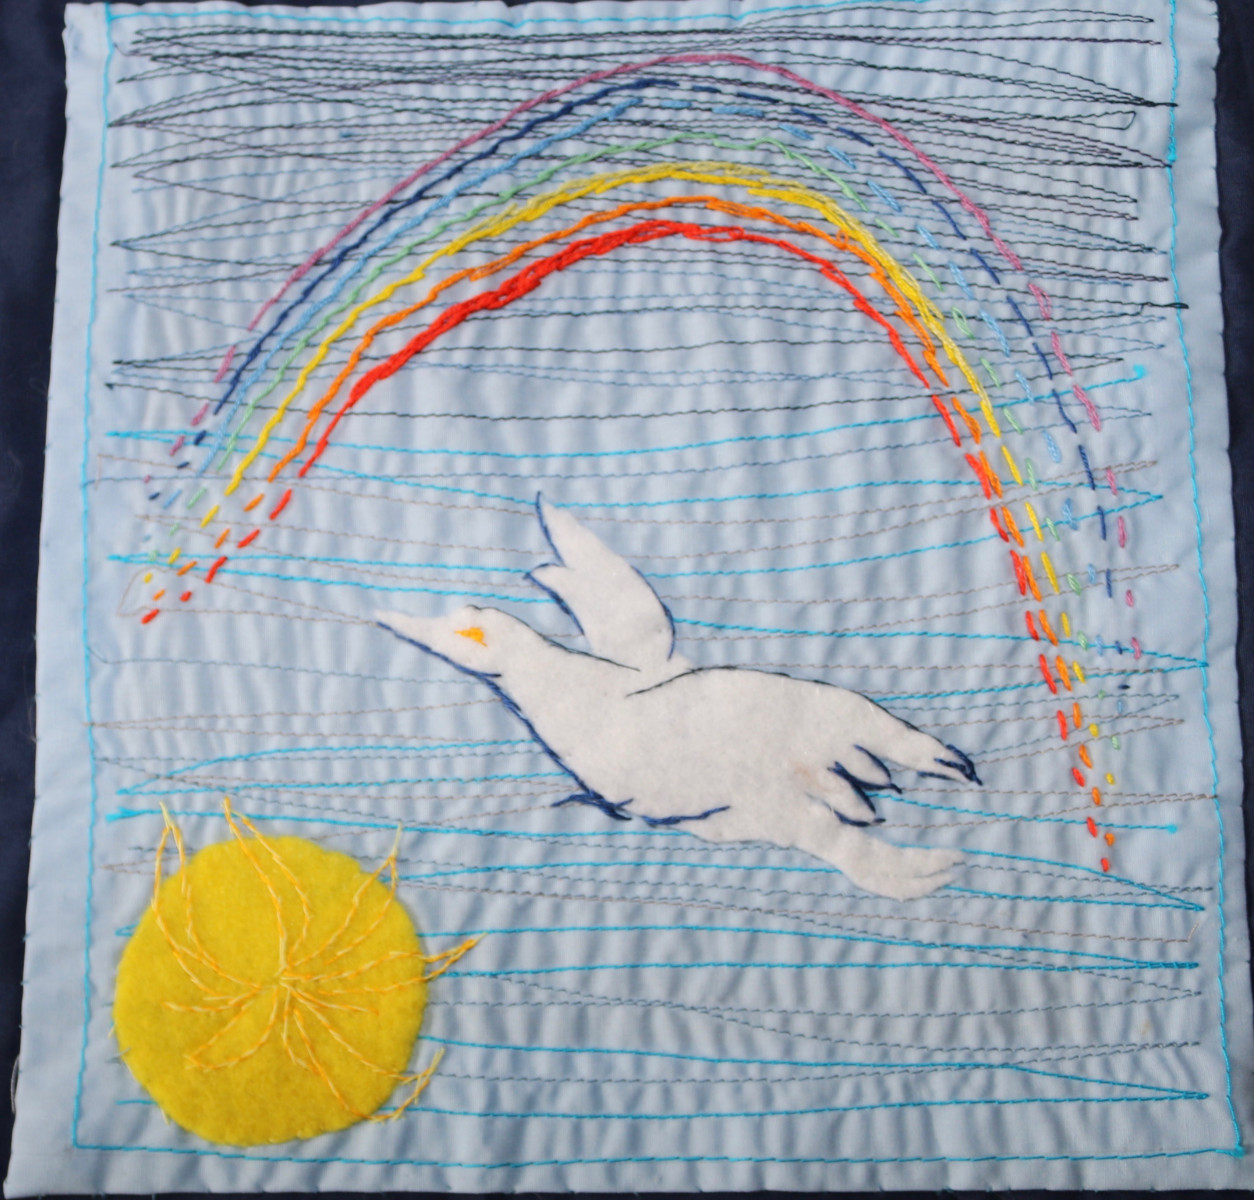 Image, created in embroidery, of a sun, dove and a rainbow